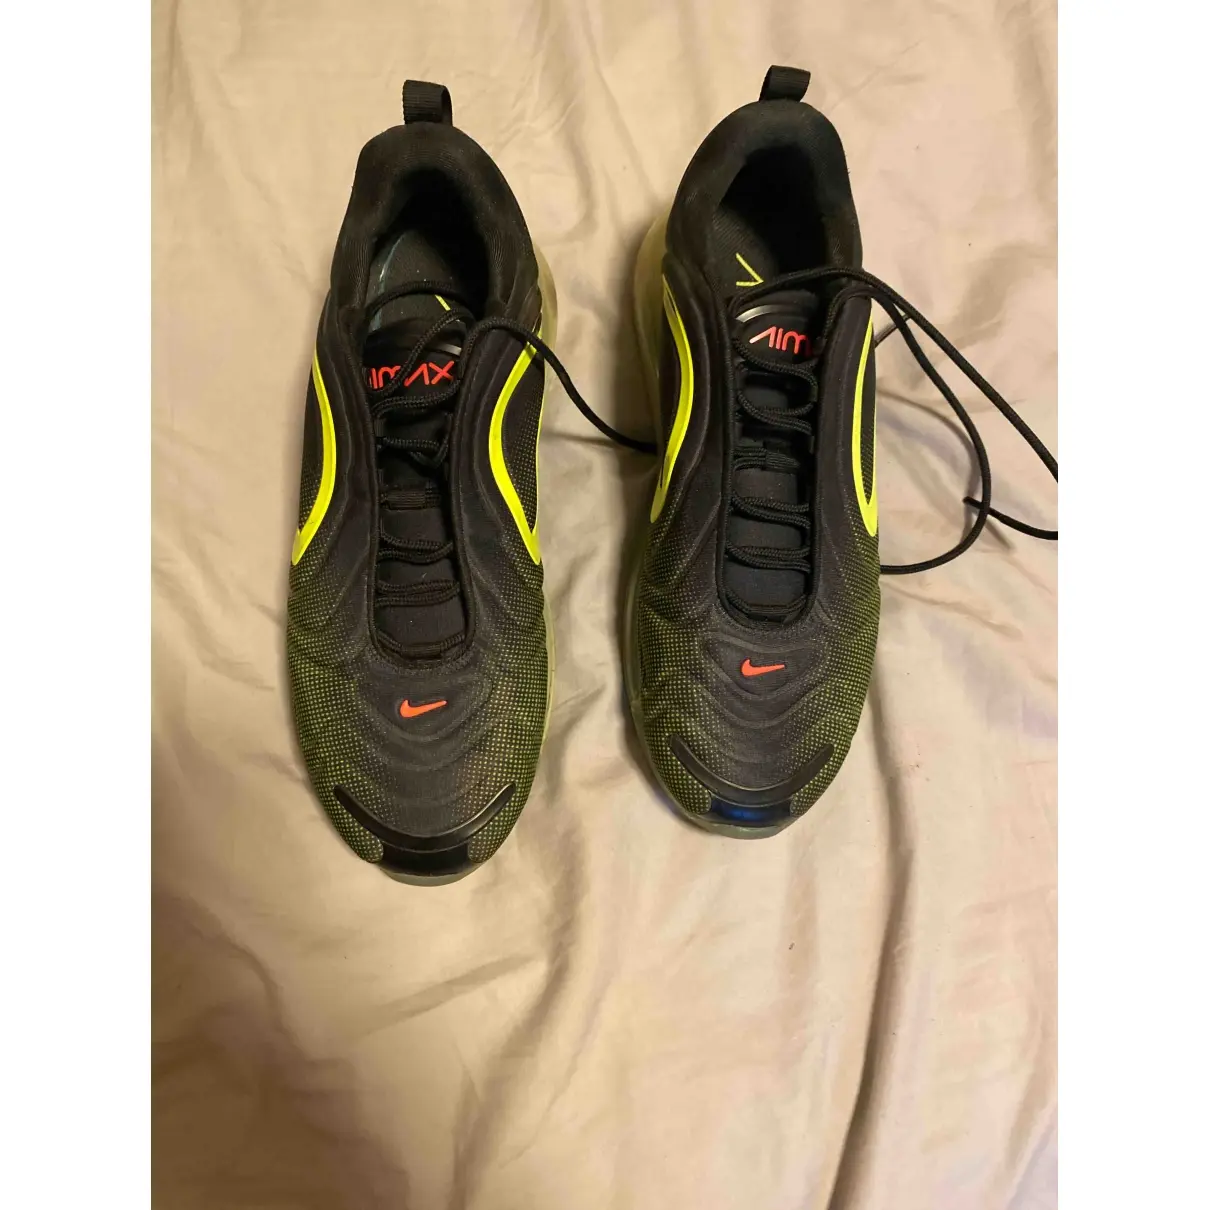 Buy Nike Air Max 720 low trainers online